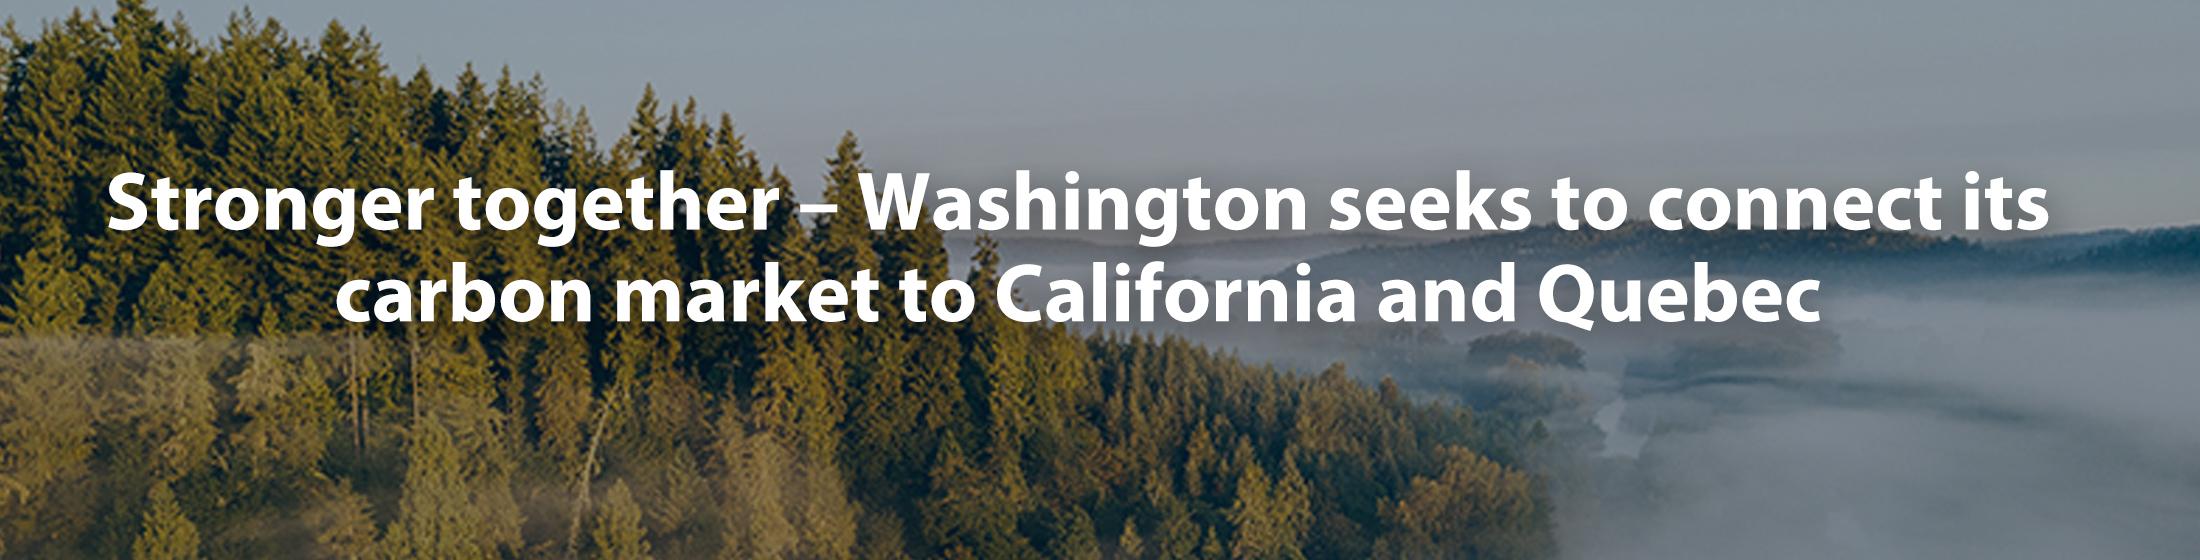 A graphic image with an overhead view of a forest with the text overlay that says: Stronger together - Washington connect its carbon market with California and Quebec.